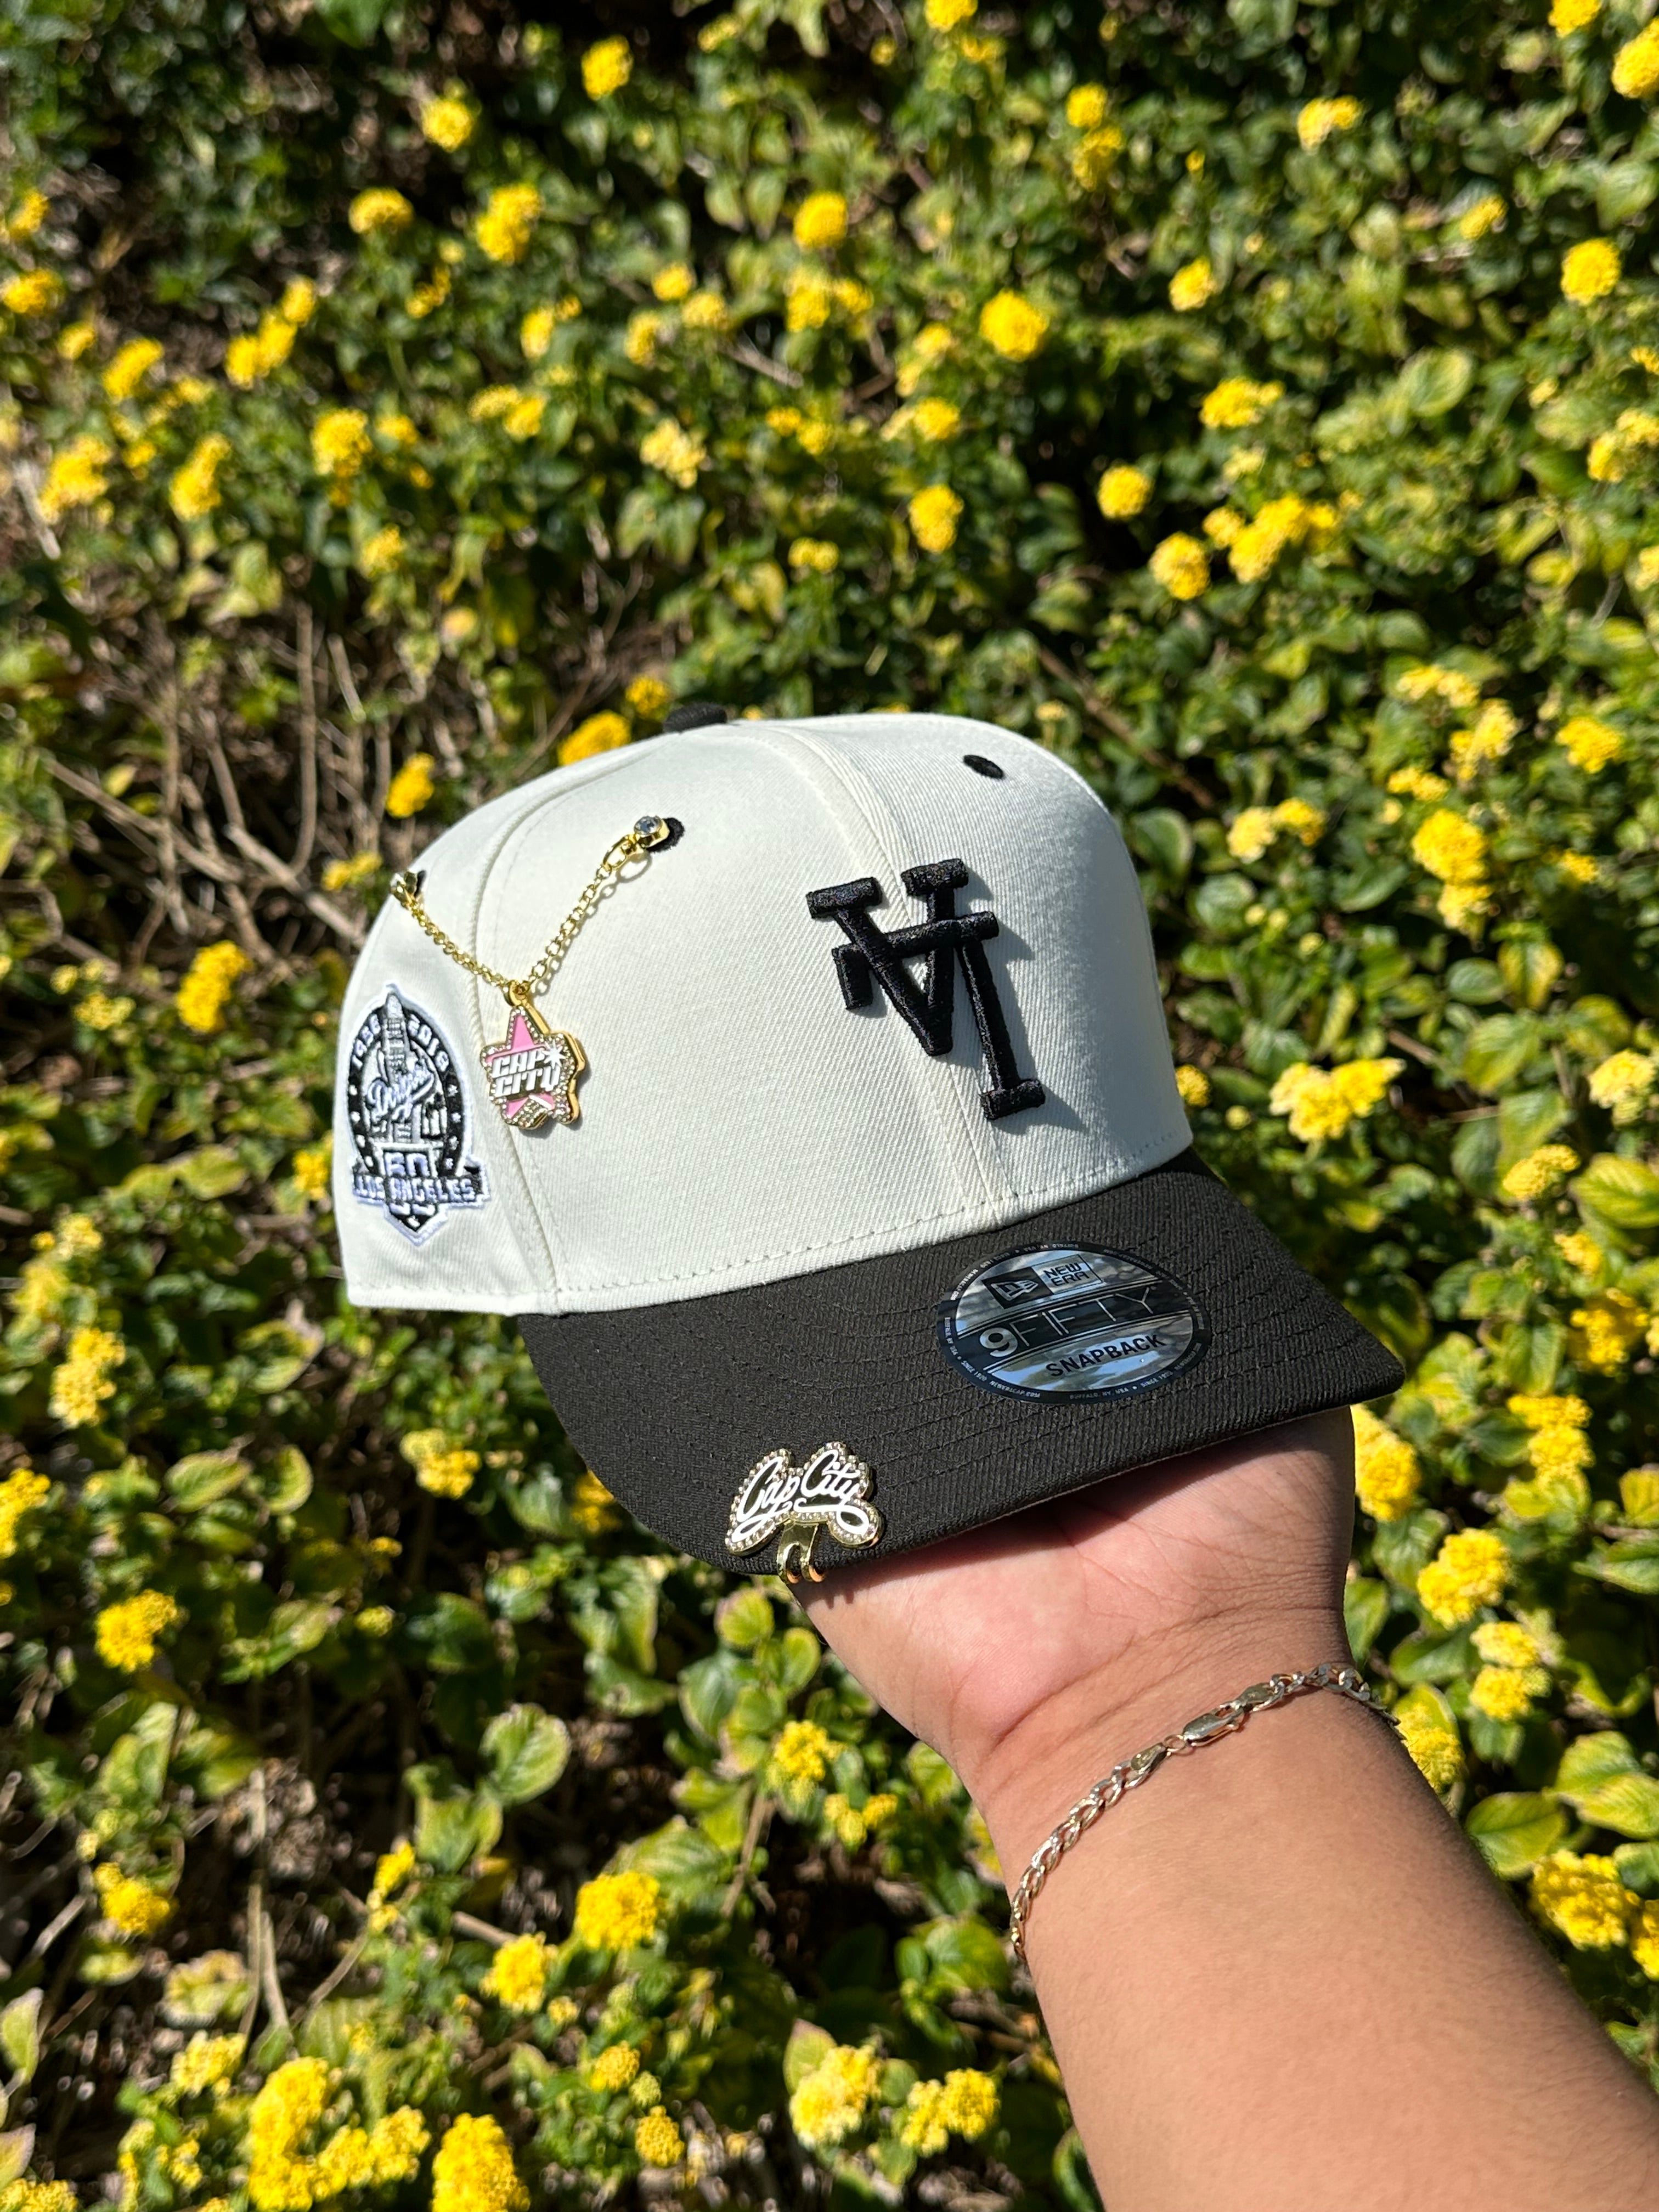 NEW ERA EXCLUSIVE 9FIFTY CHROME WHITE/BLACK UPSIDE DOWN LOS ANGELES DODGERS SNAPBACK W/ 60TH ANNIVERSARY SIDE PATCH